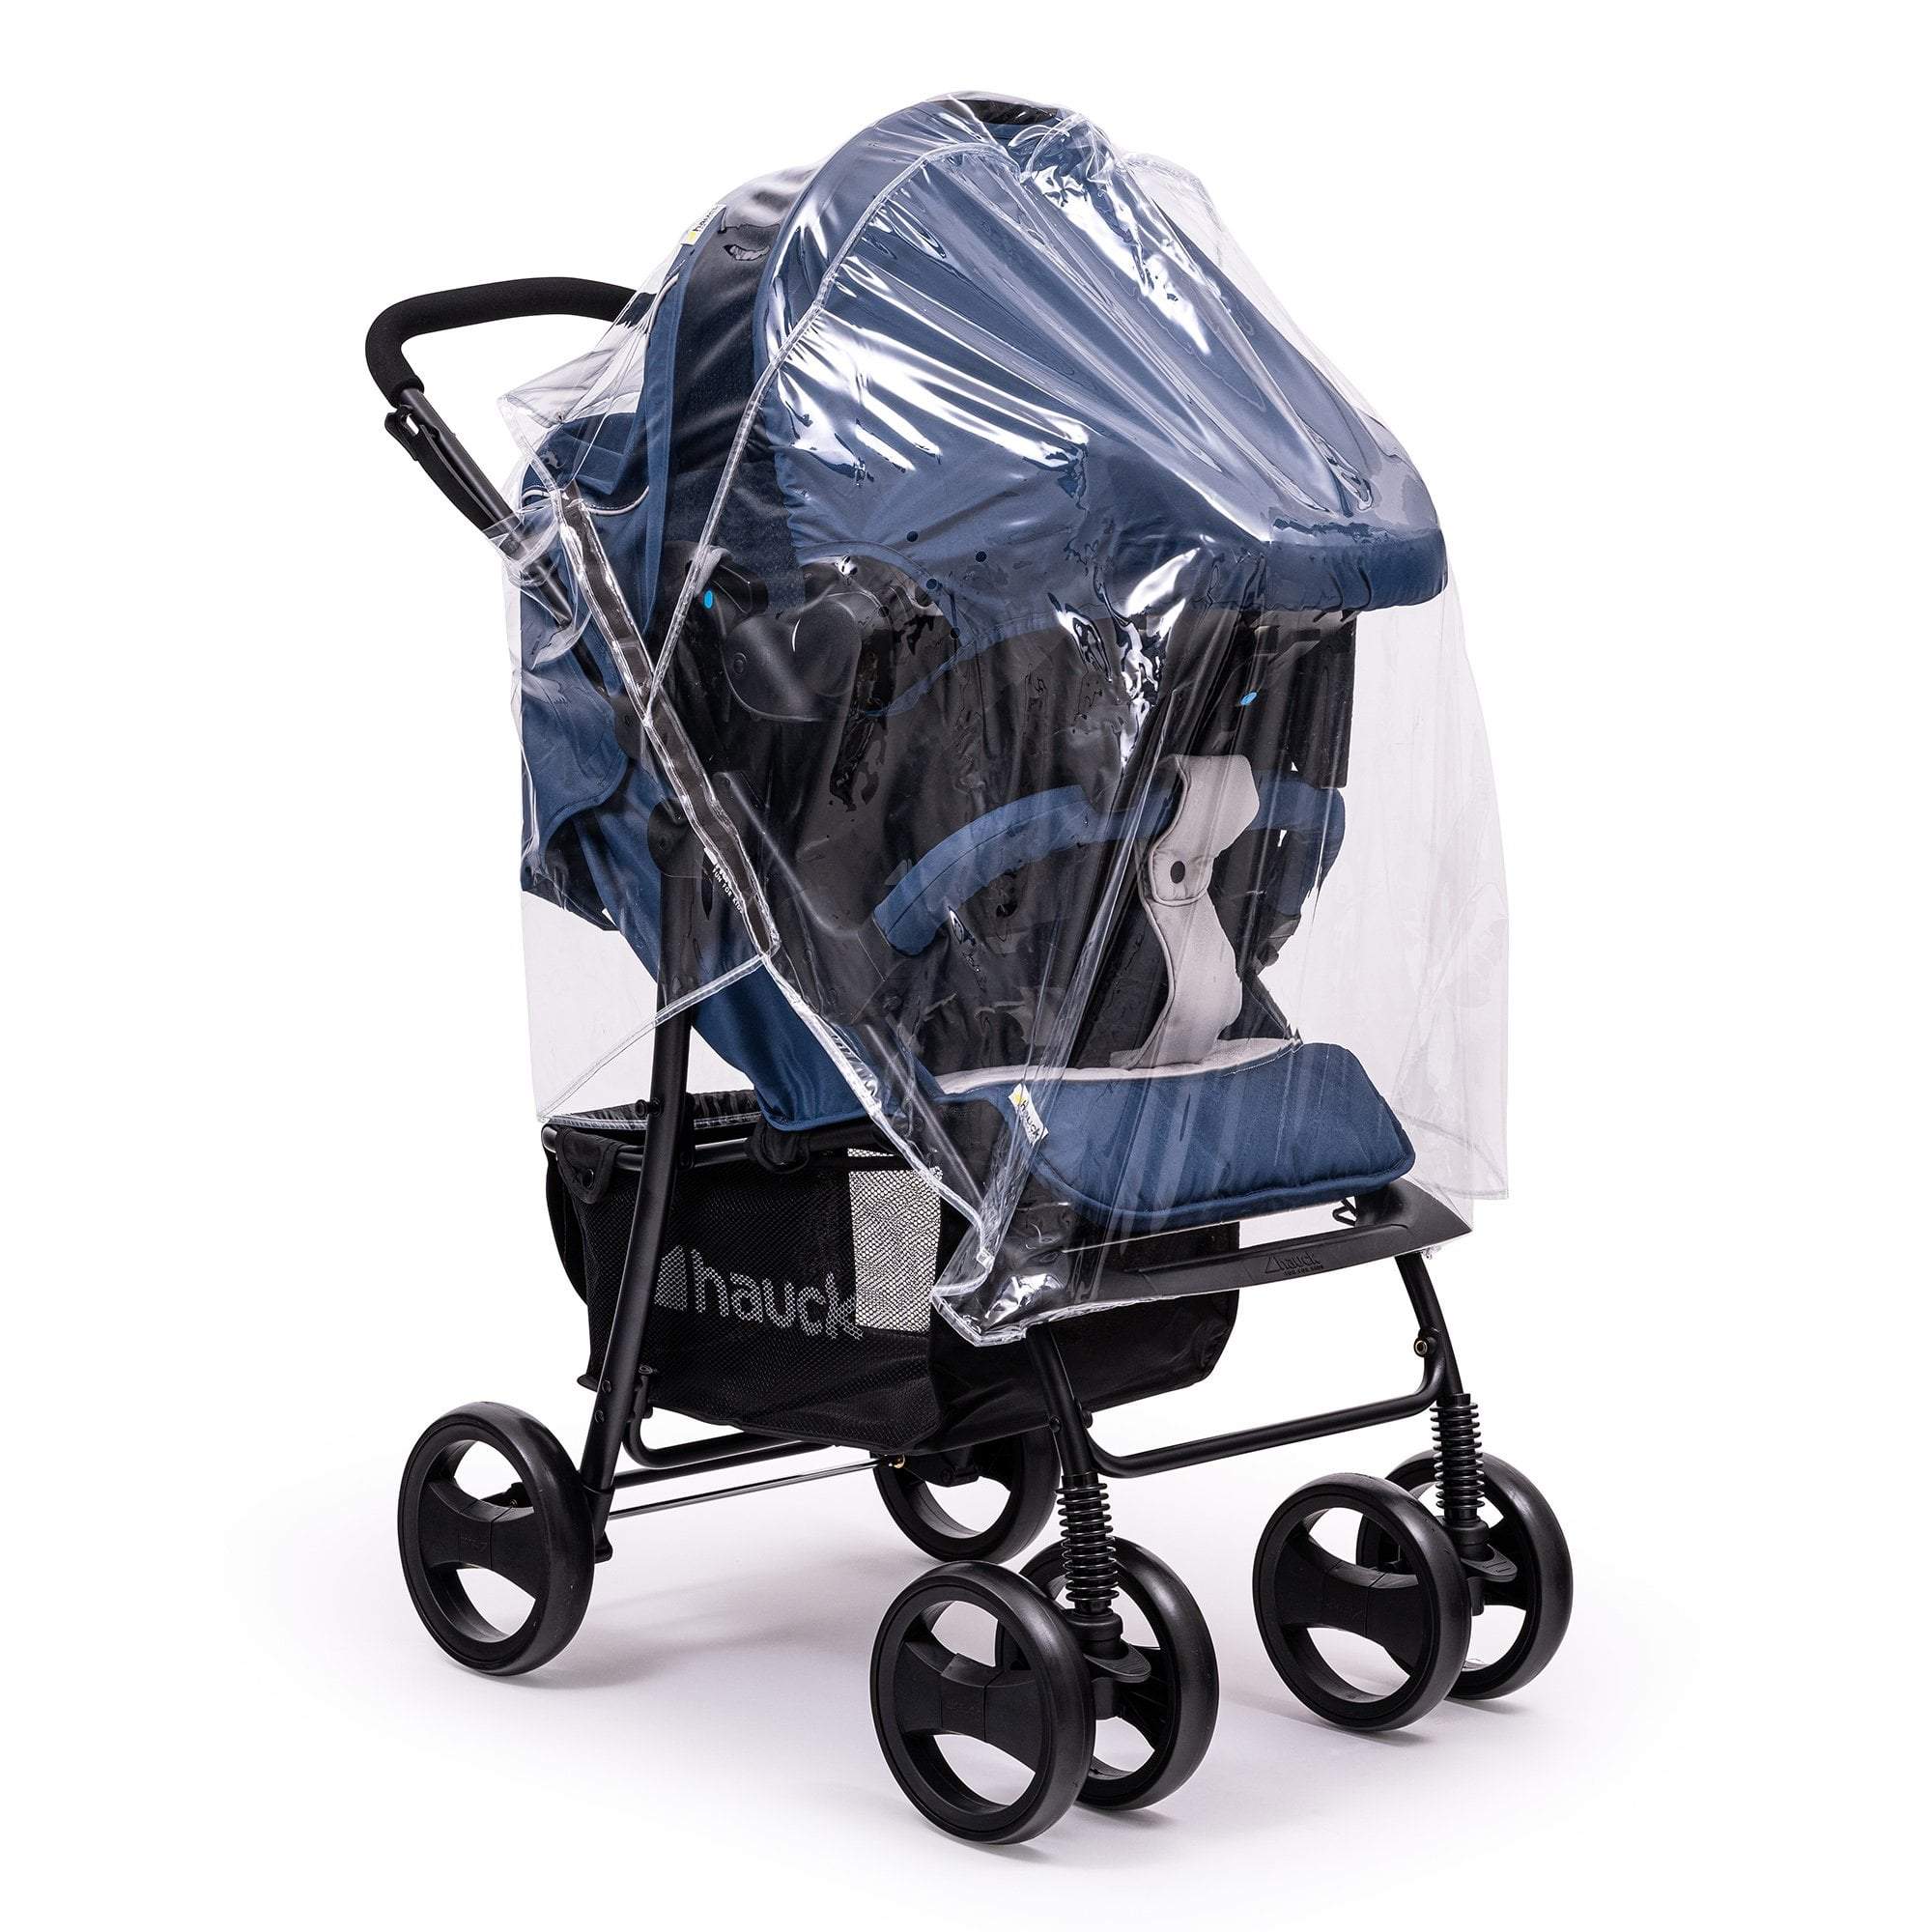 Travel System Raincover Compatible with Safety 1st - Fits All Models - For Your Little One